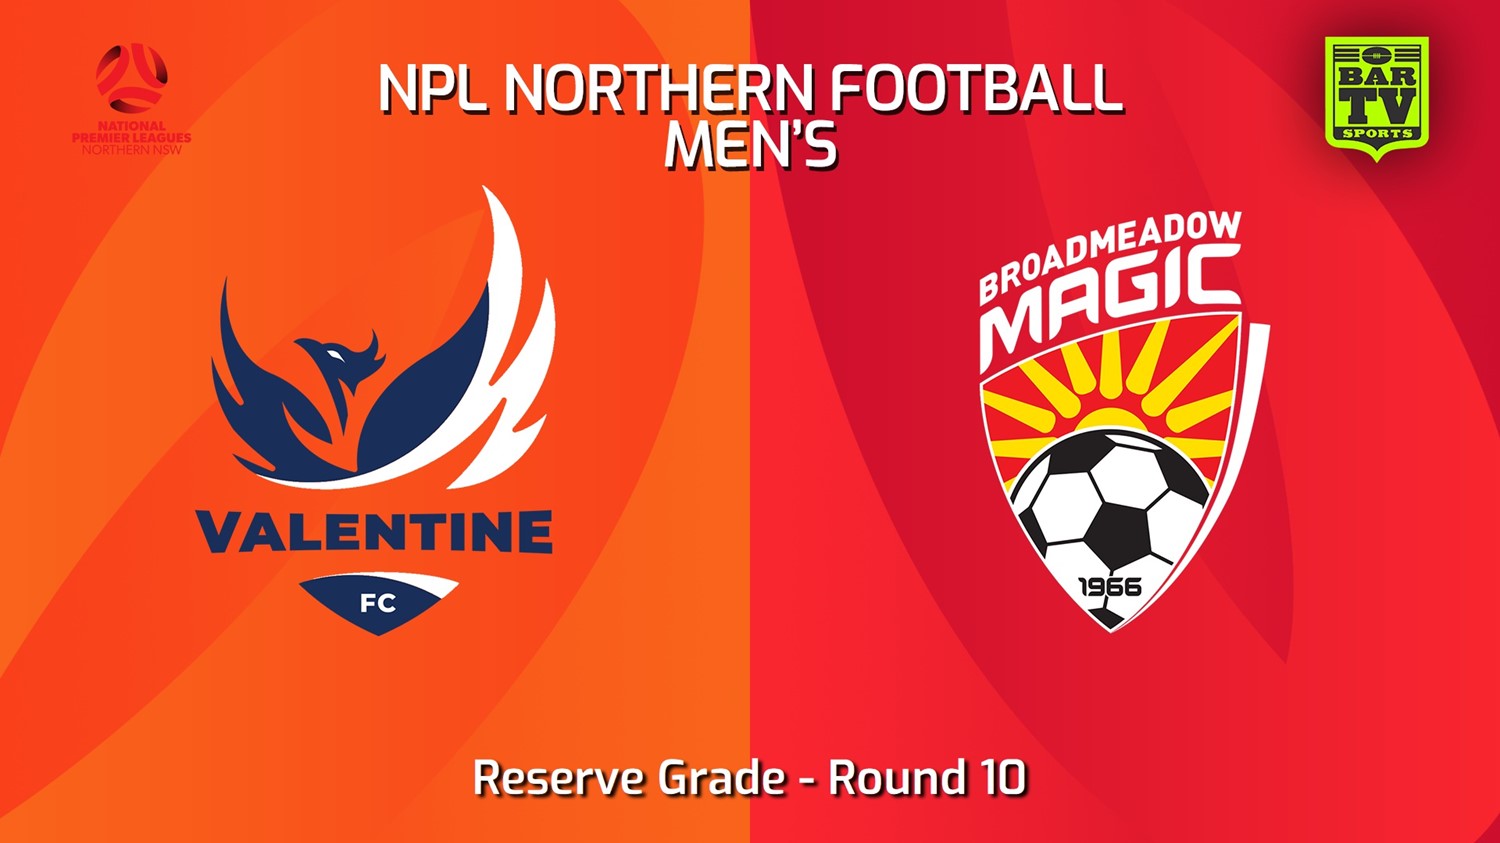 240504-video-NNSW NPLM Res Round 10 - Valentine Phoenix FC Res v Broadmeadow Magic Res Minigame Slate Image